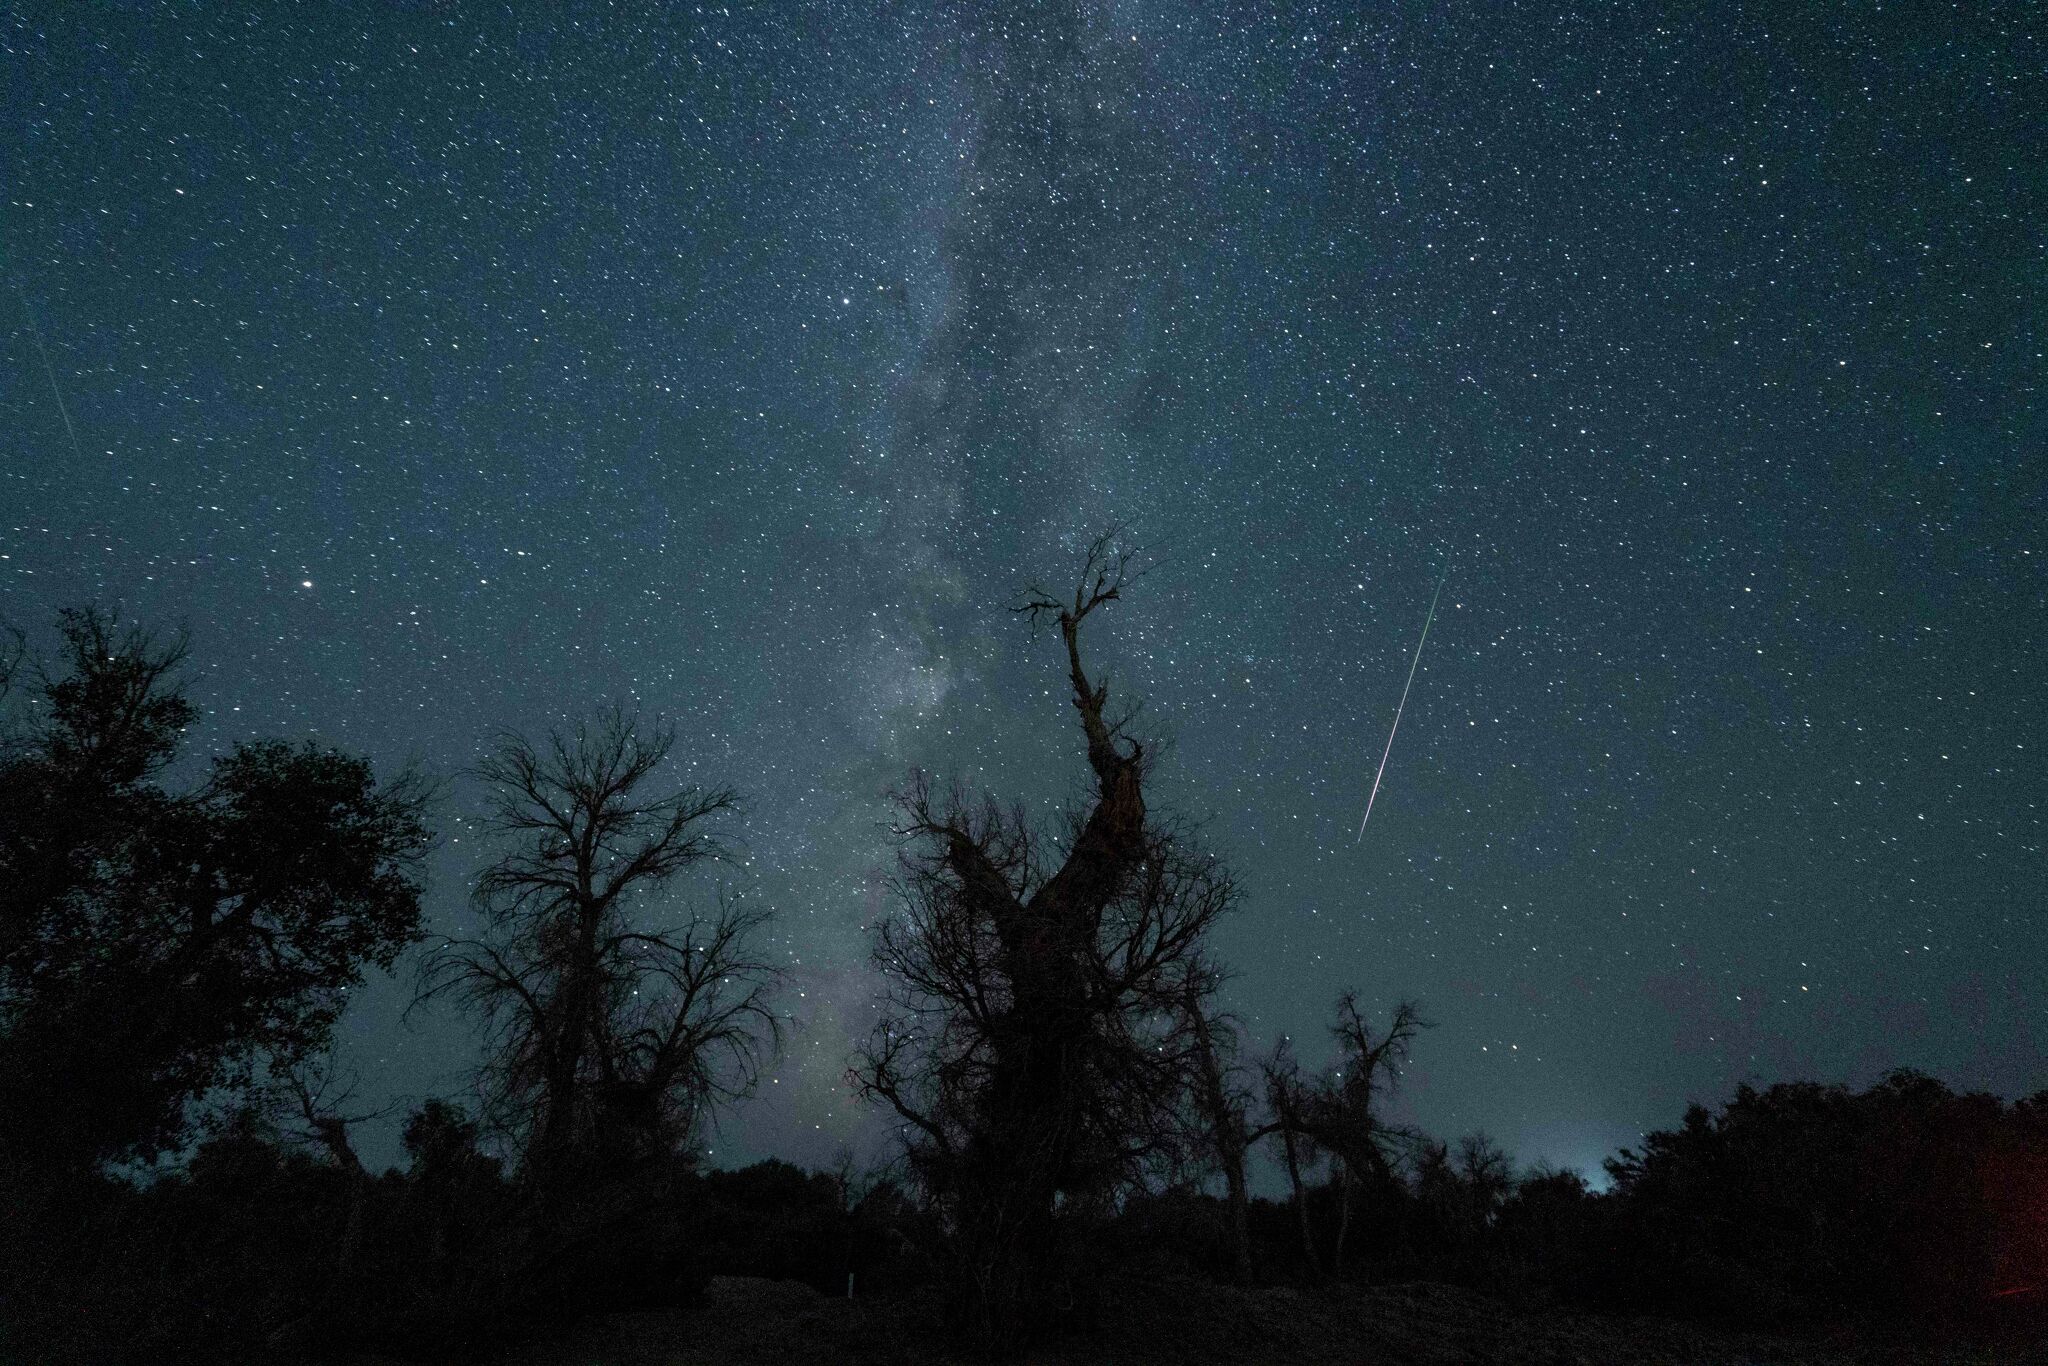 Perseid meteor shower activity to peak above Connecticut this weekend